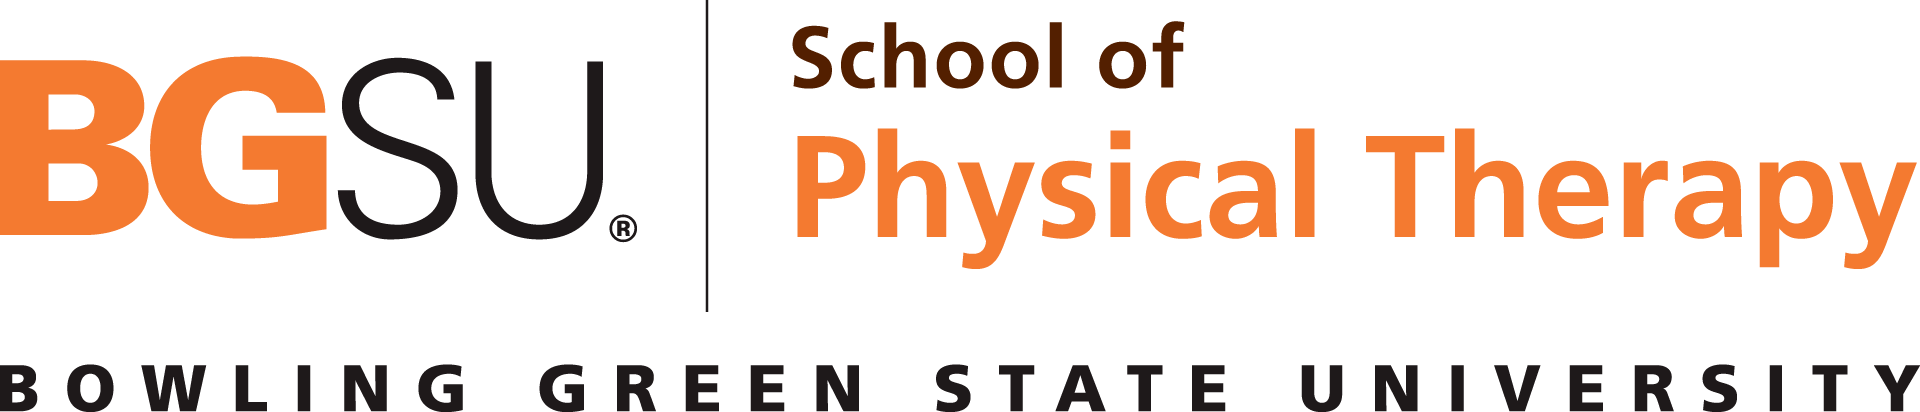 20HH4599 School of Physical Therapy Logotype